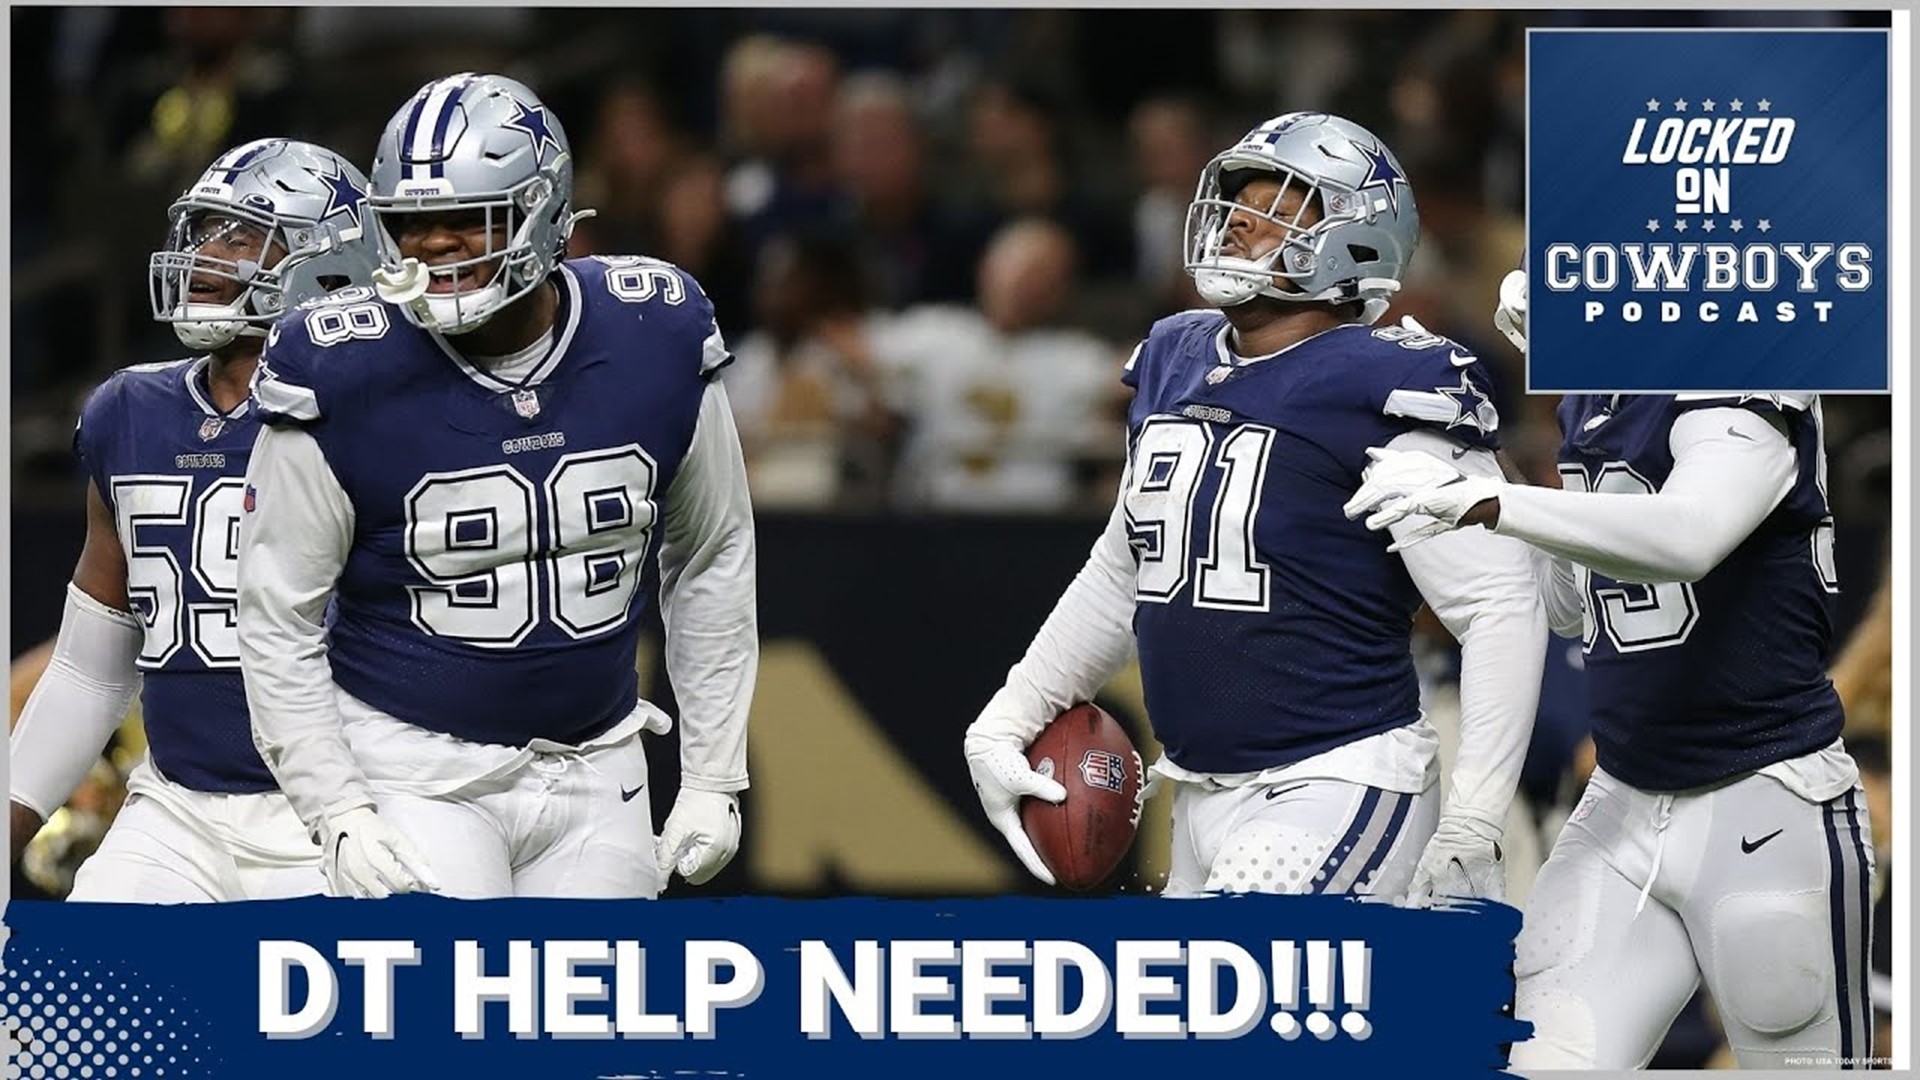 Marcus Mosher and Landon McCool review the Dallas Cowboys' 2022 defensive tackle play and debate if it was the worst positional group on the roster.